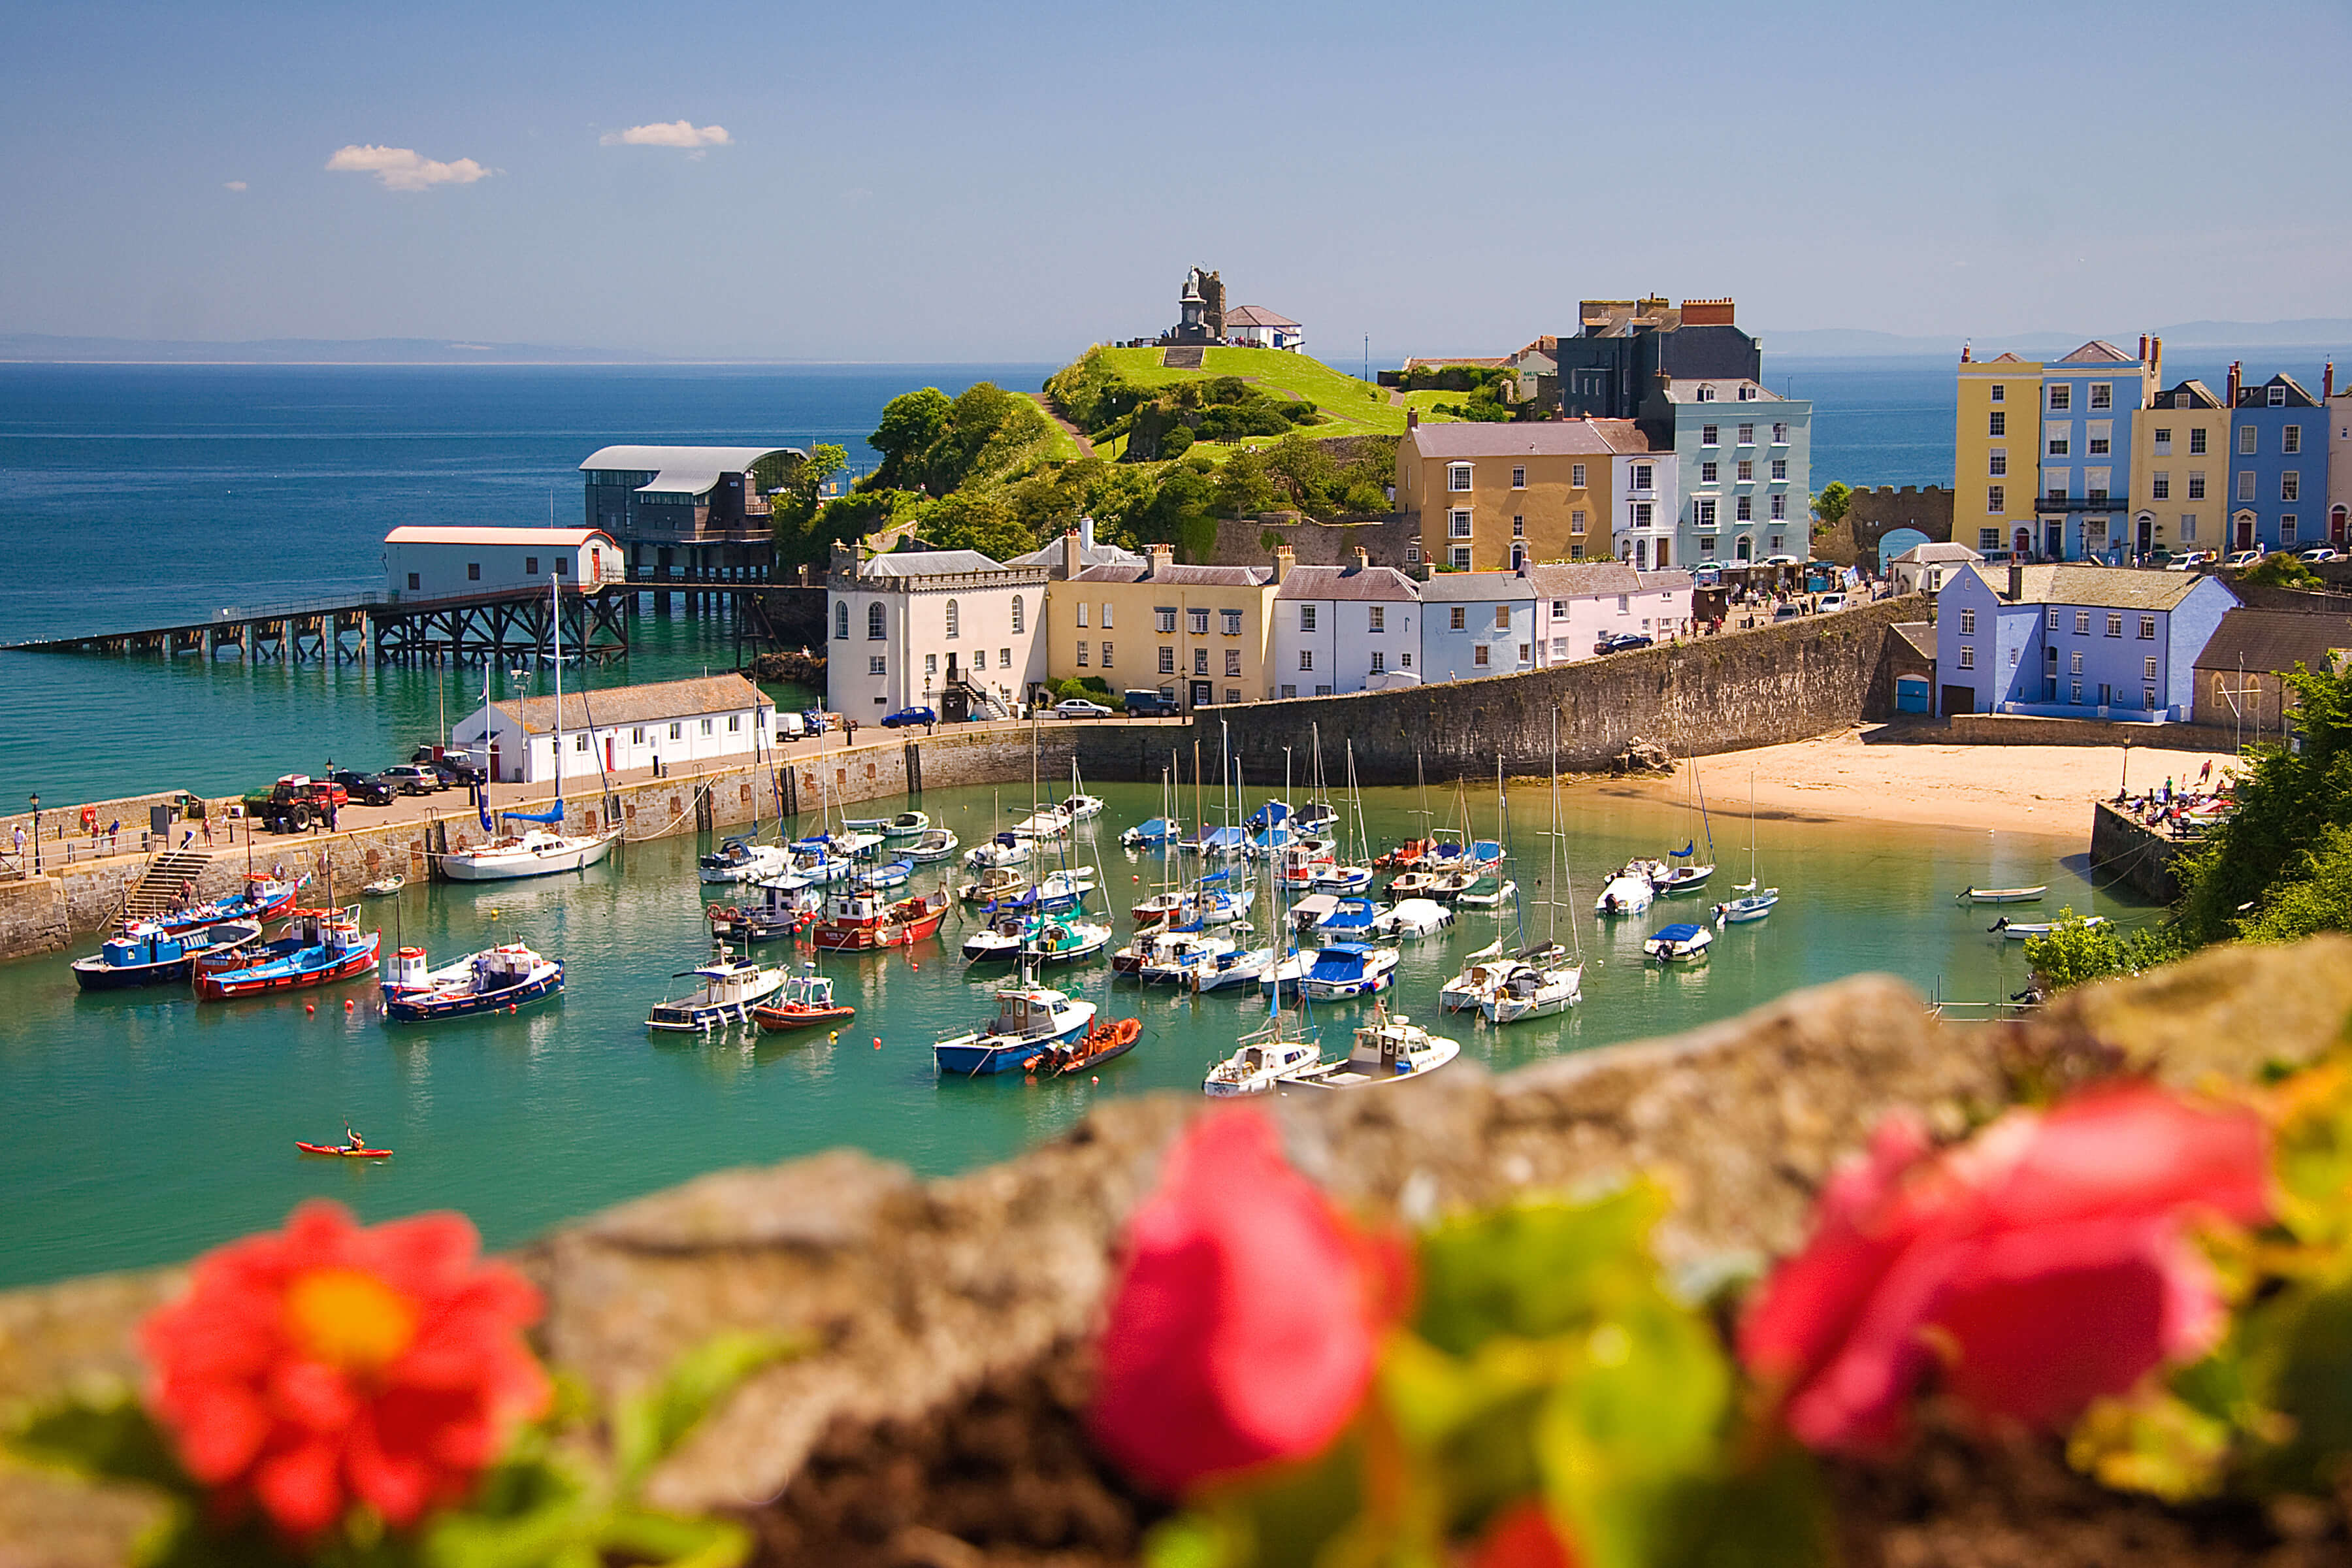 Self Catering Holiday Cottages near Tenby, Wales